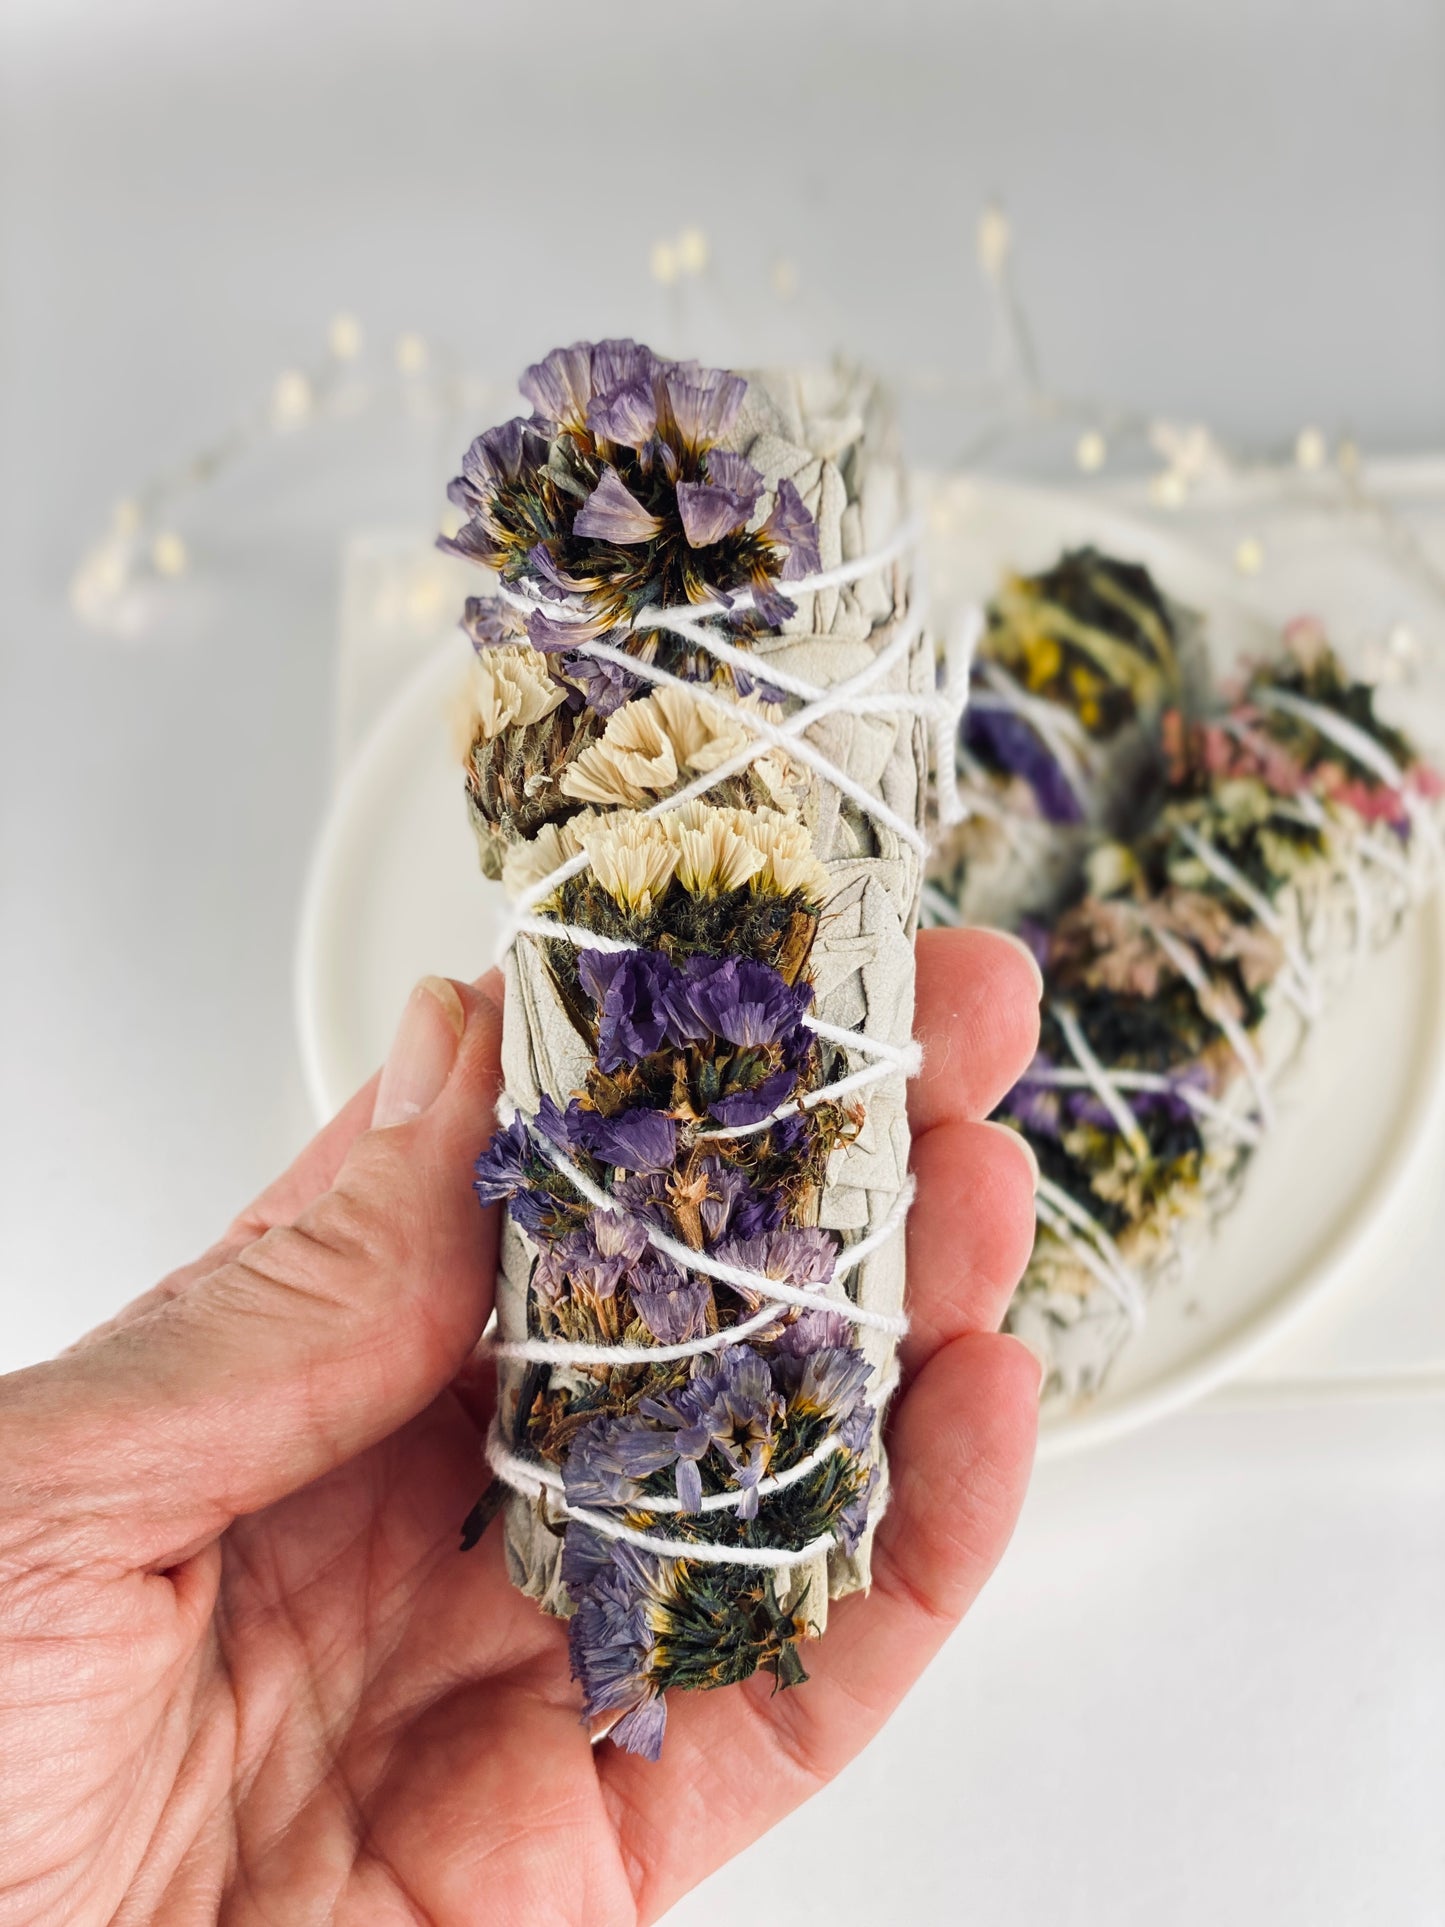 White sage smudge stick with flowers ~ Cleanse your aura, home and crystals.